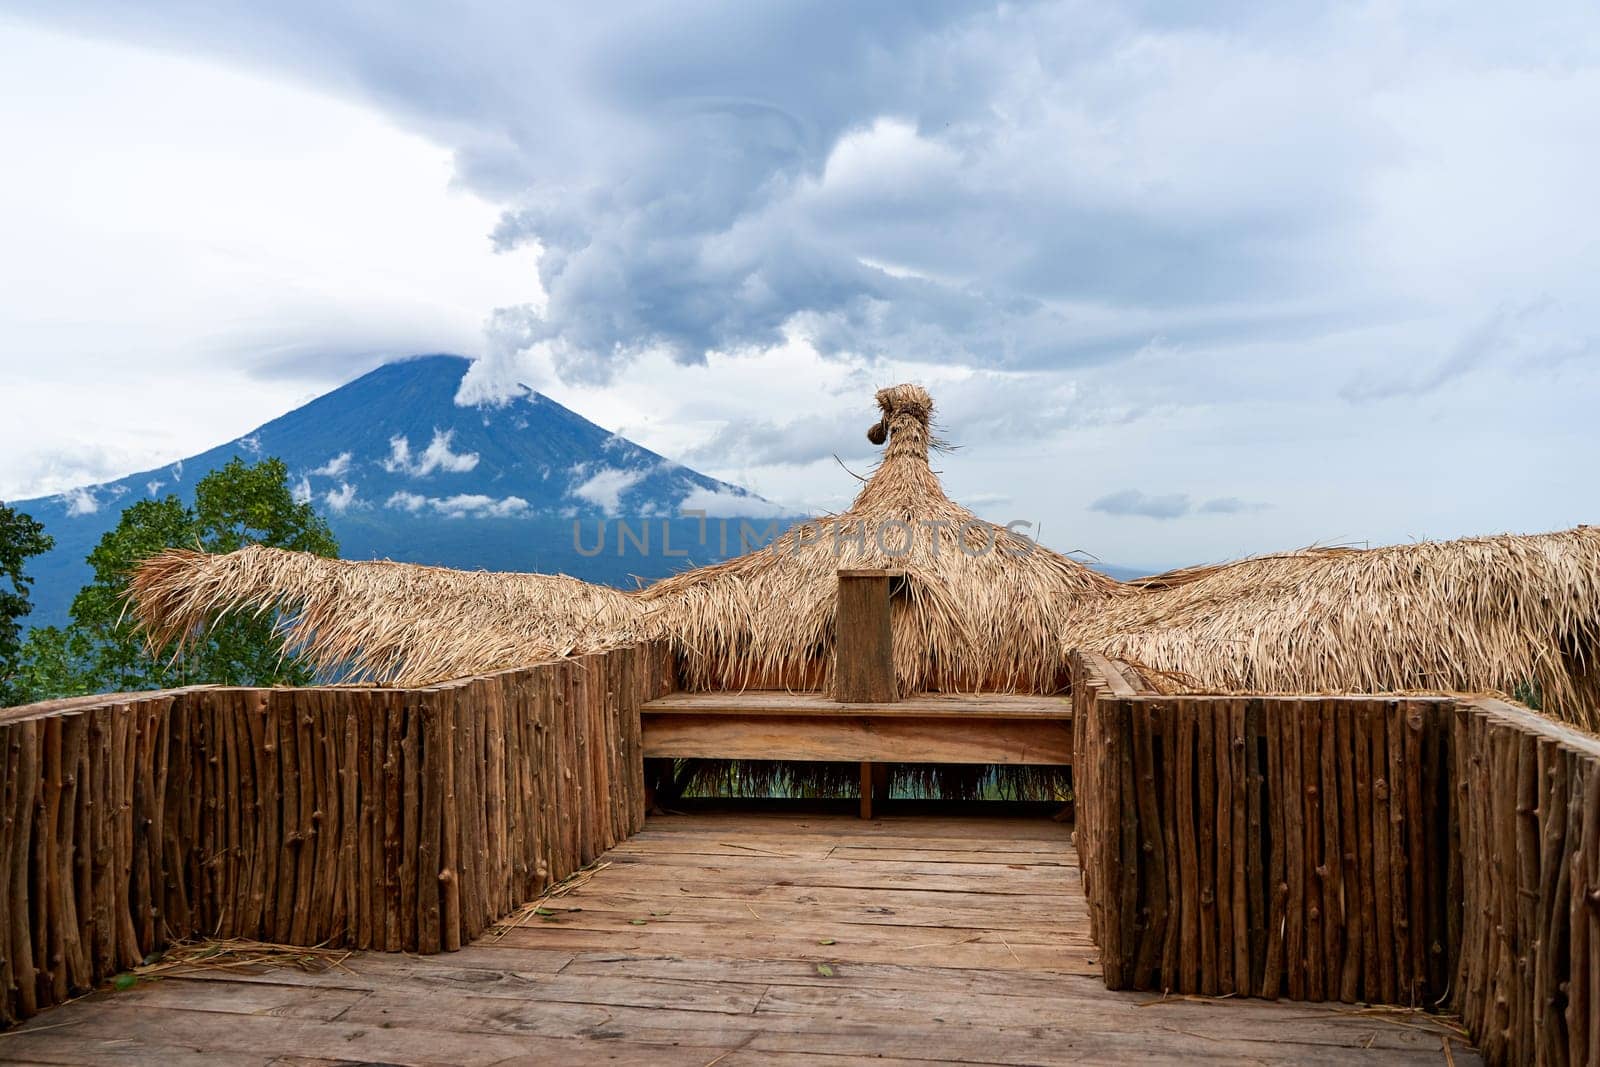 A large straw photo zone - a bird on a viewpoint overlooking the sacred volcano Agung, hidden by clouds on a rainy day on the island of Bali